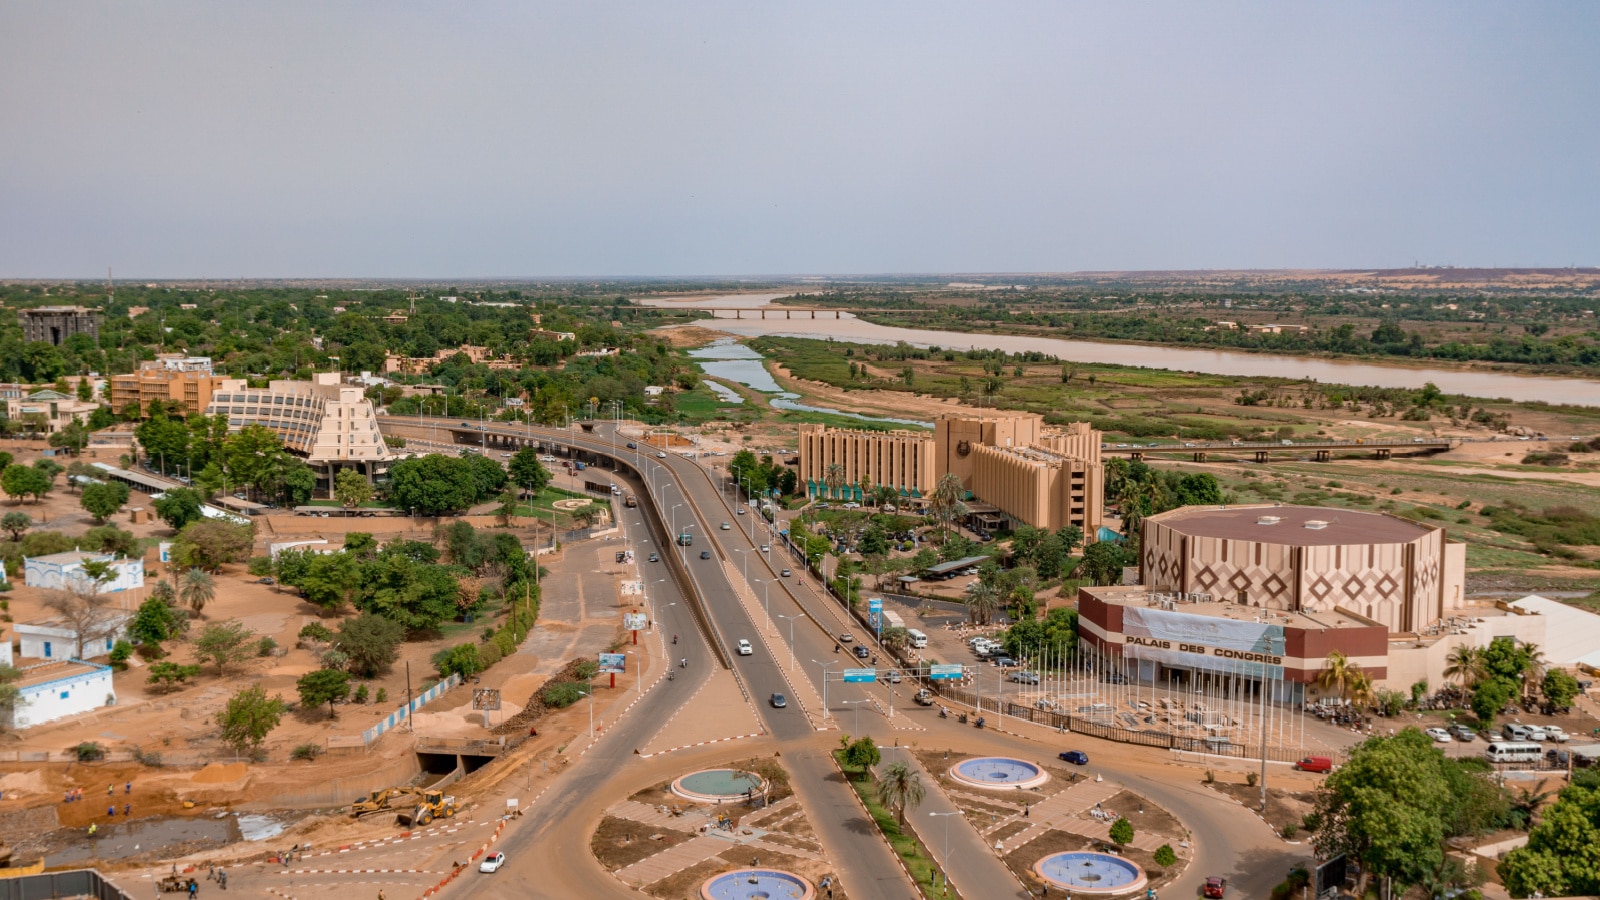 panaromic view of Niamey city which is capitol city of Niger in Niamey in Africa 25 june 2019